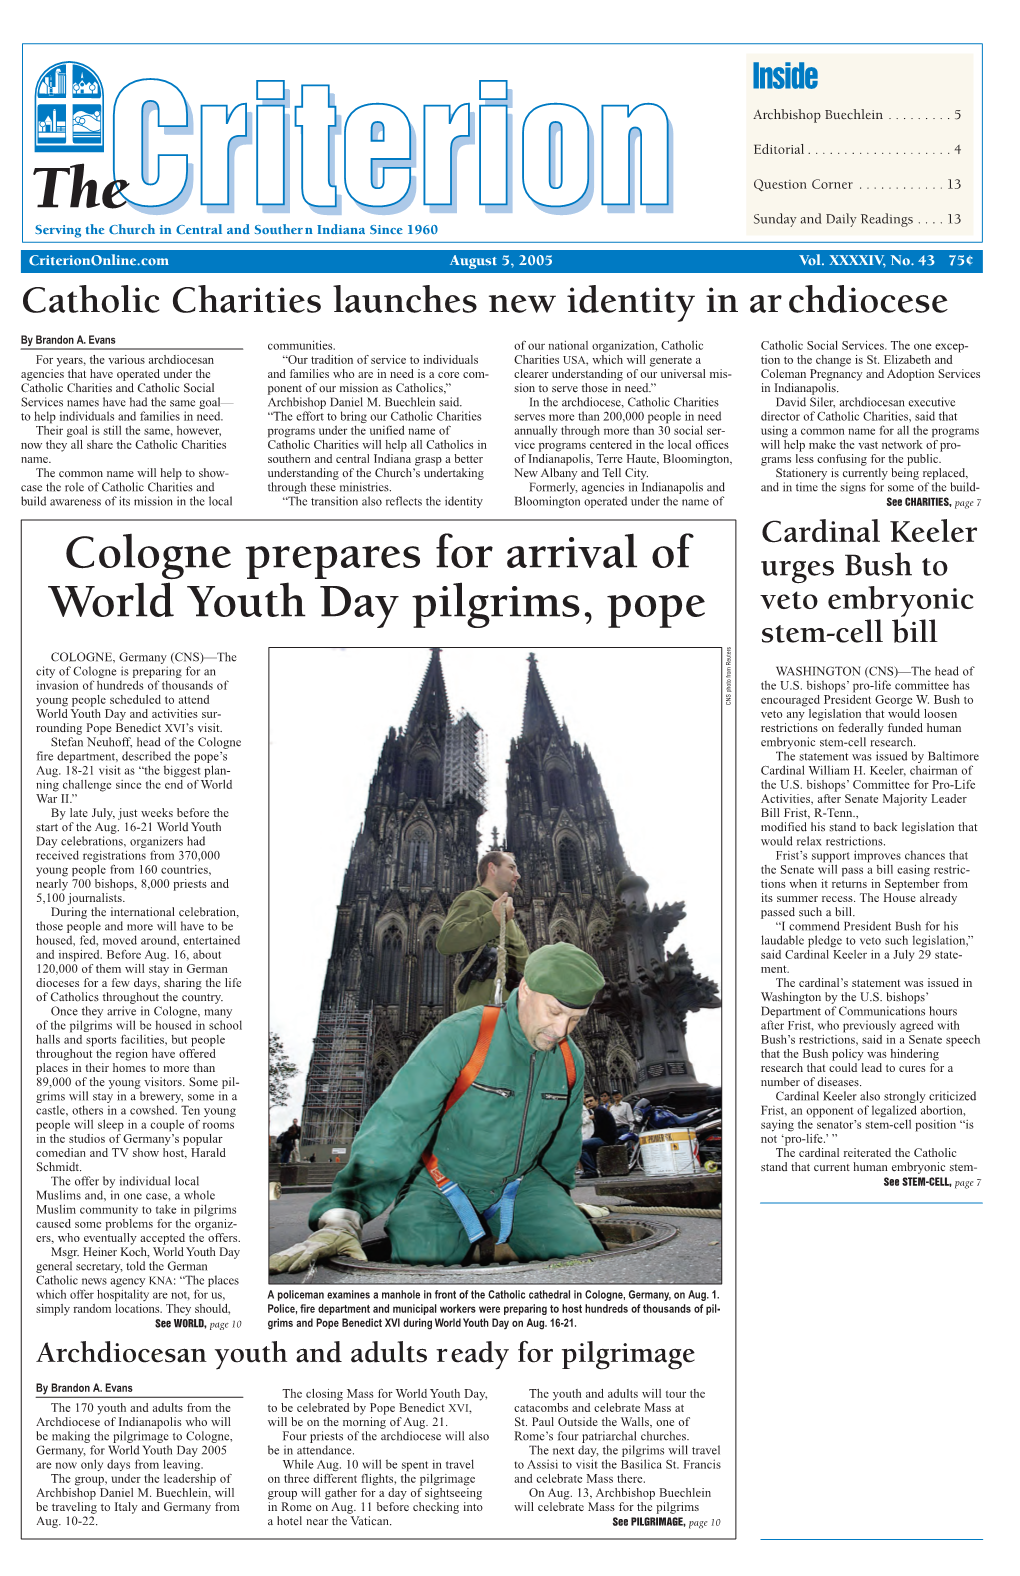 Cologne Prepares for Arrival of World Youth Day Pilgrims, Pope